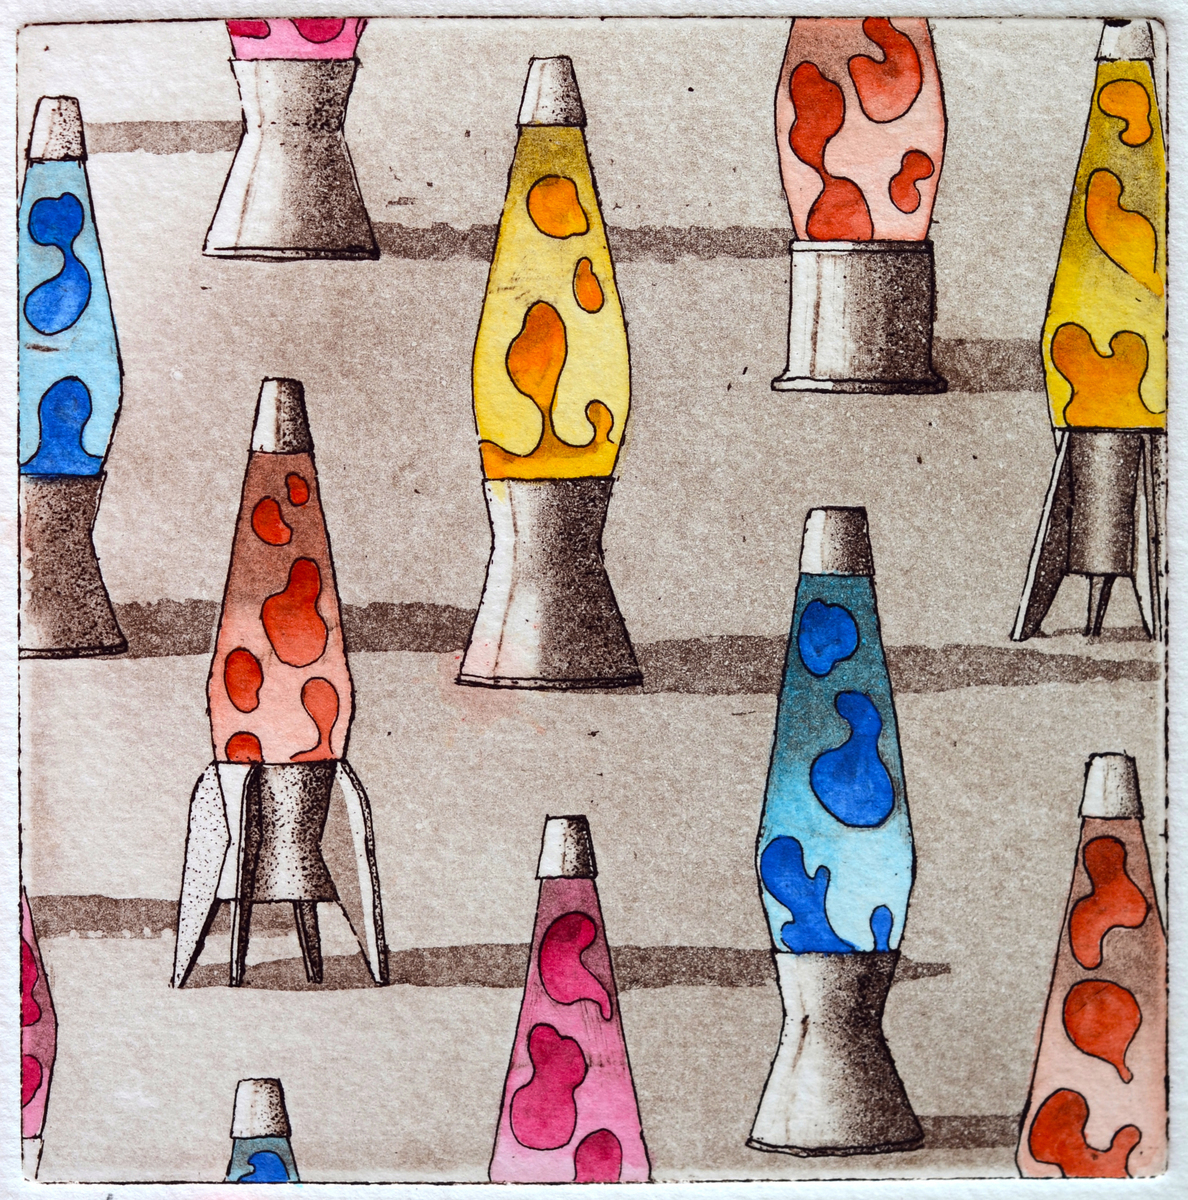 Lava Lamps - Kitsch Collection